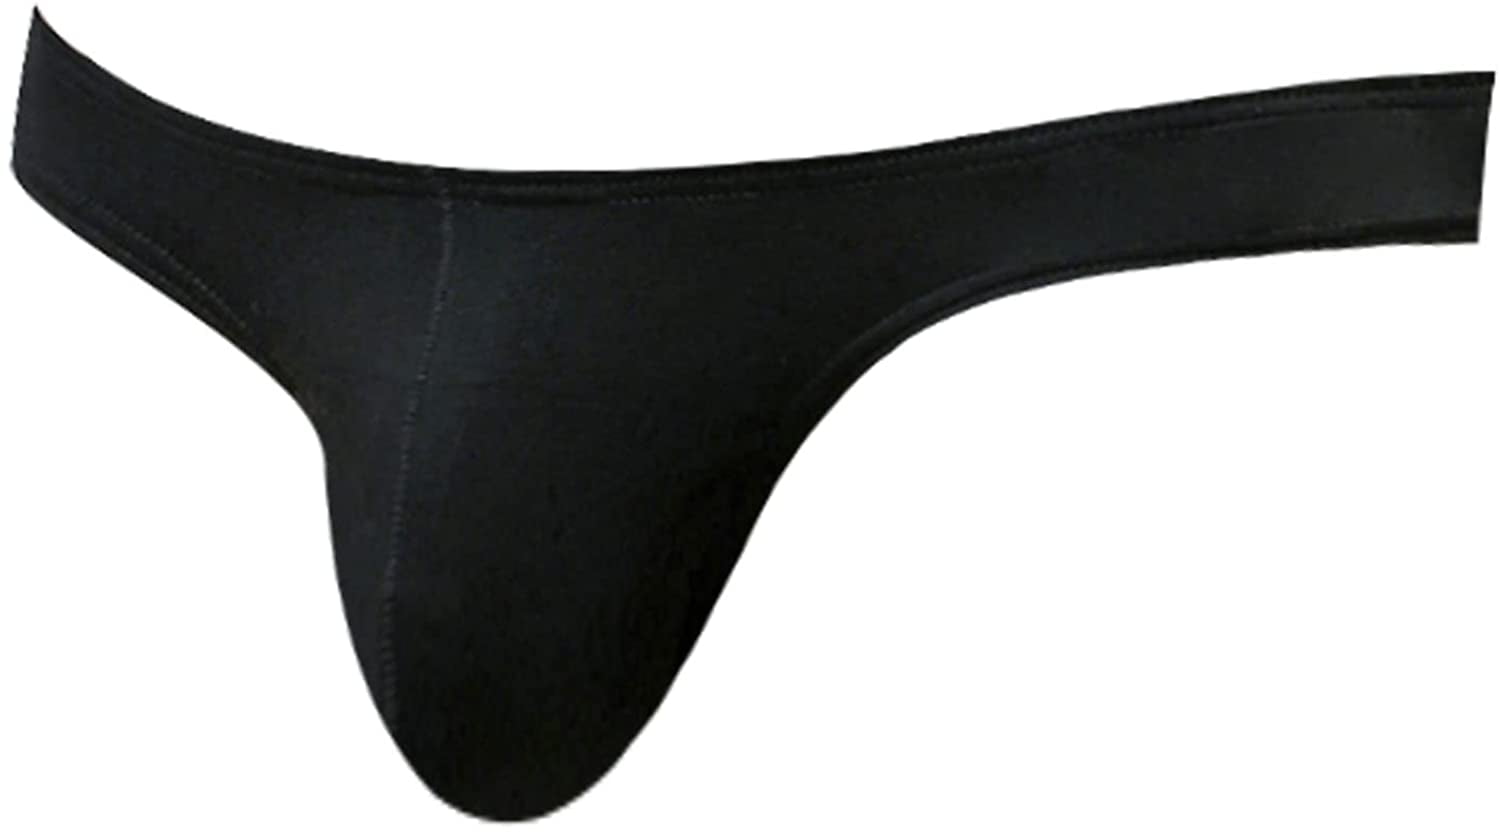 Pdbokew Mens Thongs Underwear G-String Quick-Drying Comfortable T-Back 